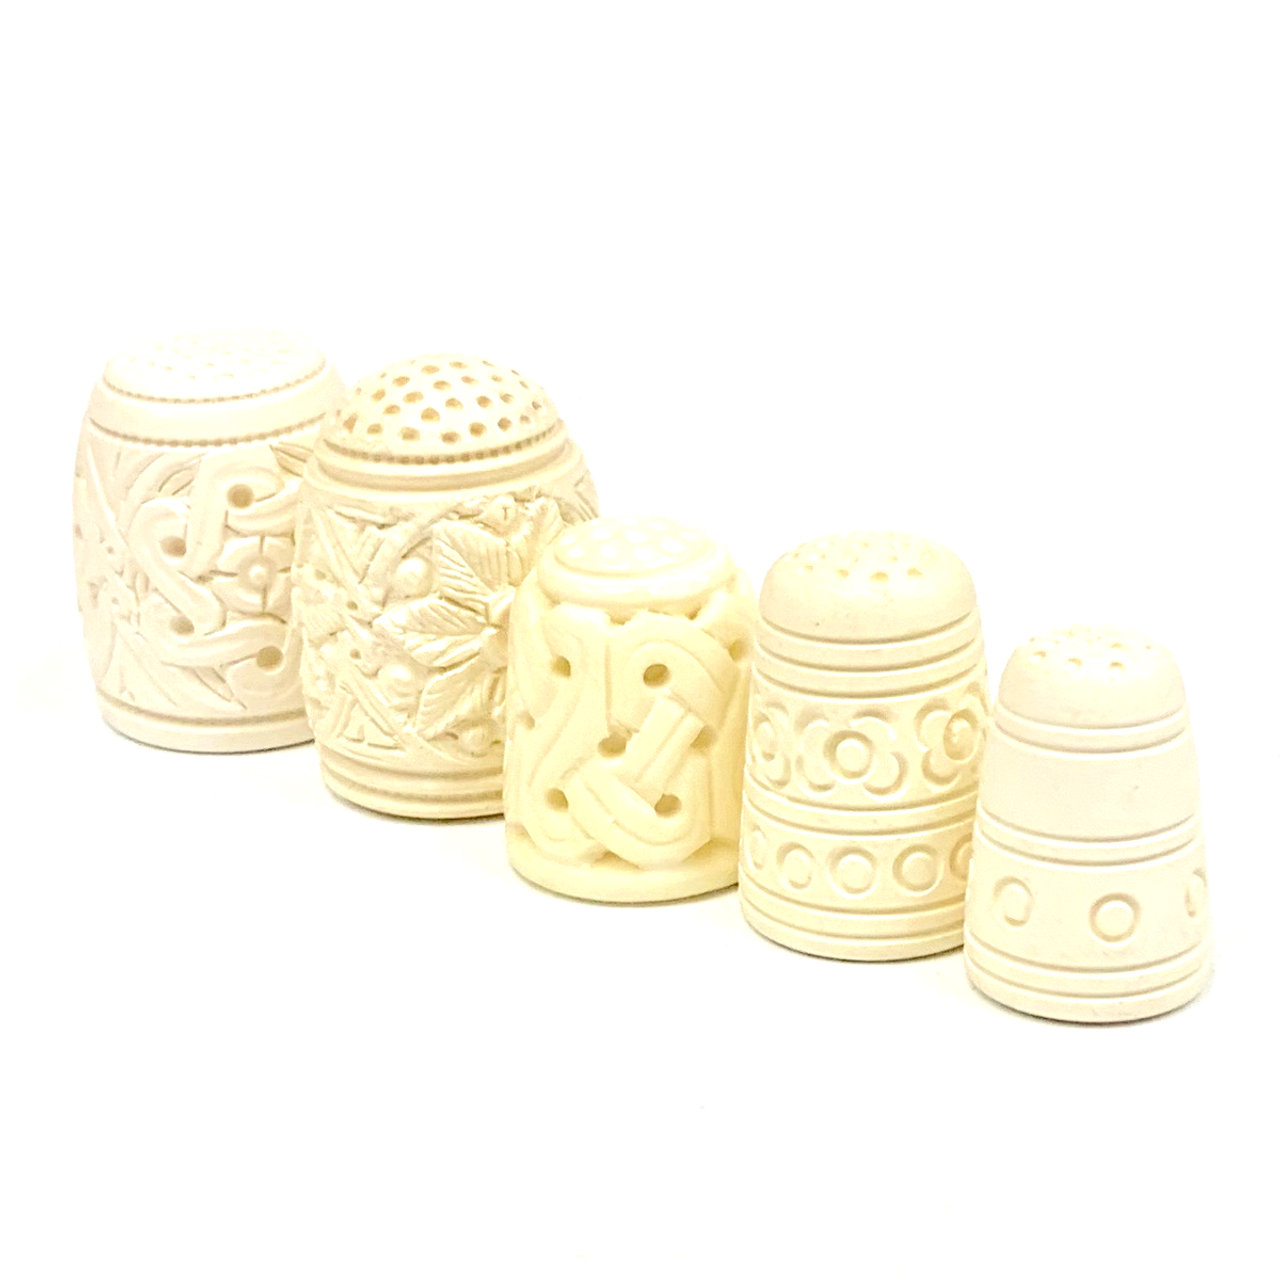 Meerschaum Thimbles From Turkey, Assorted Sizes and Styles 1 Count